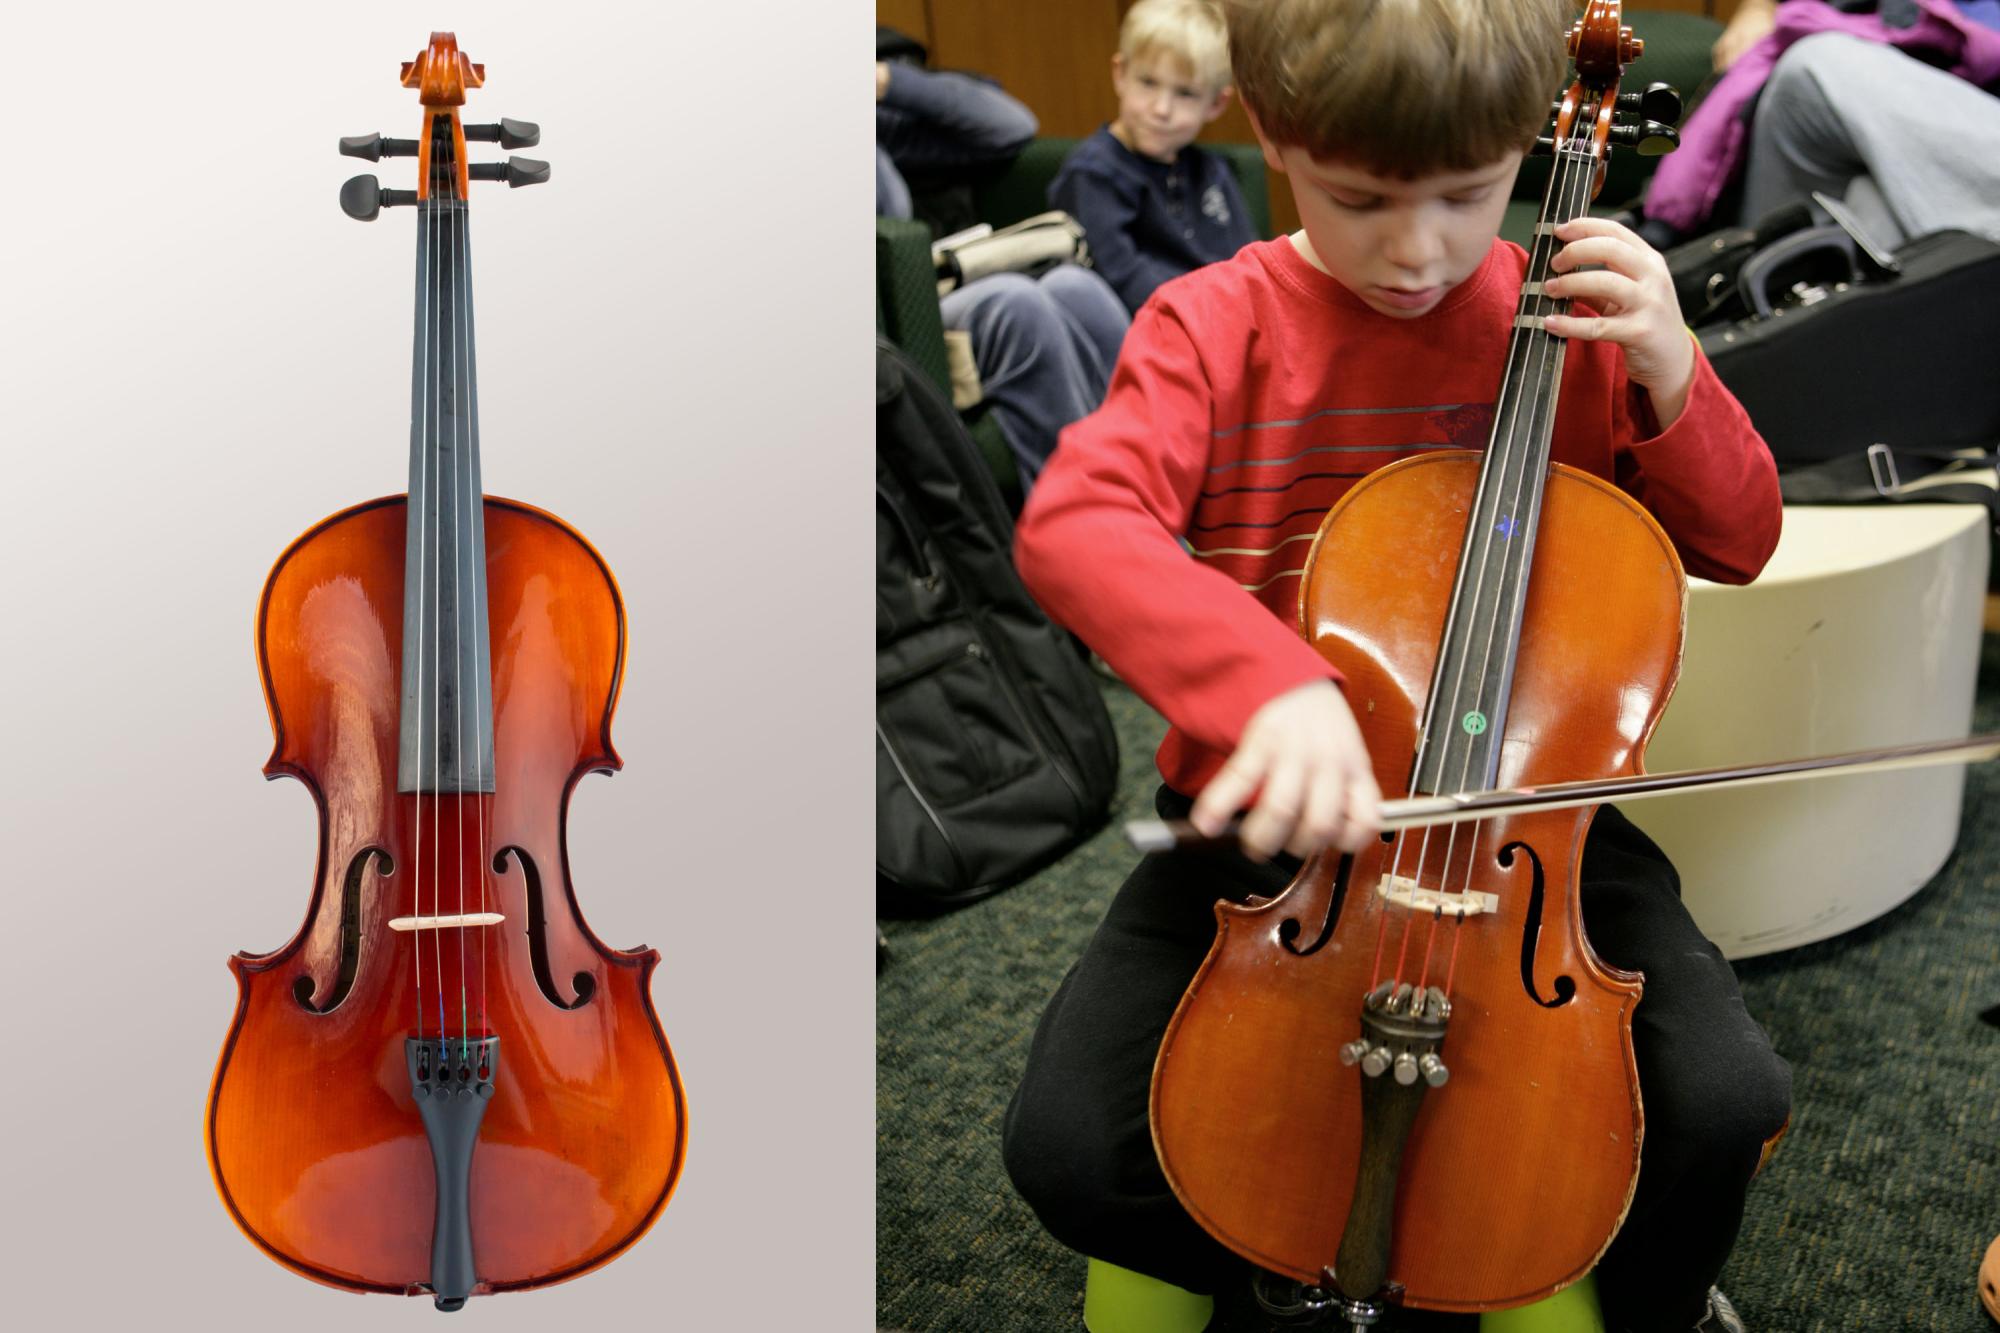 A side-by-side image of a full sized cello, and a child playing a small student's cello